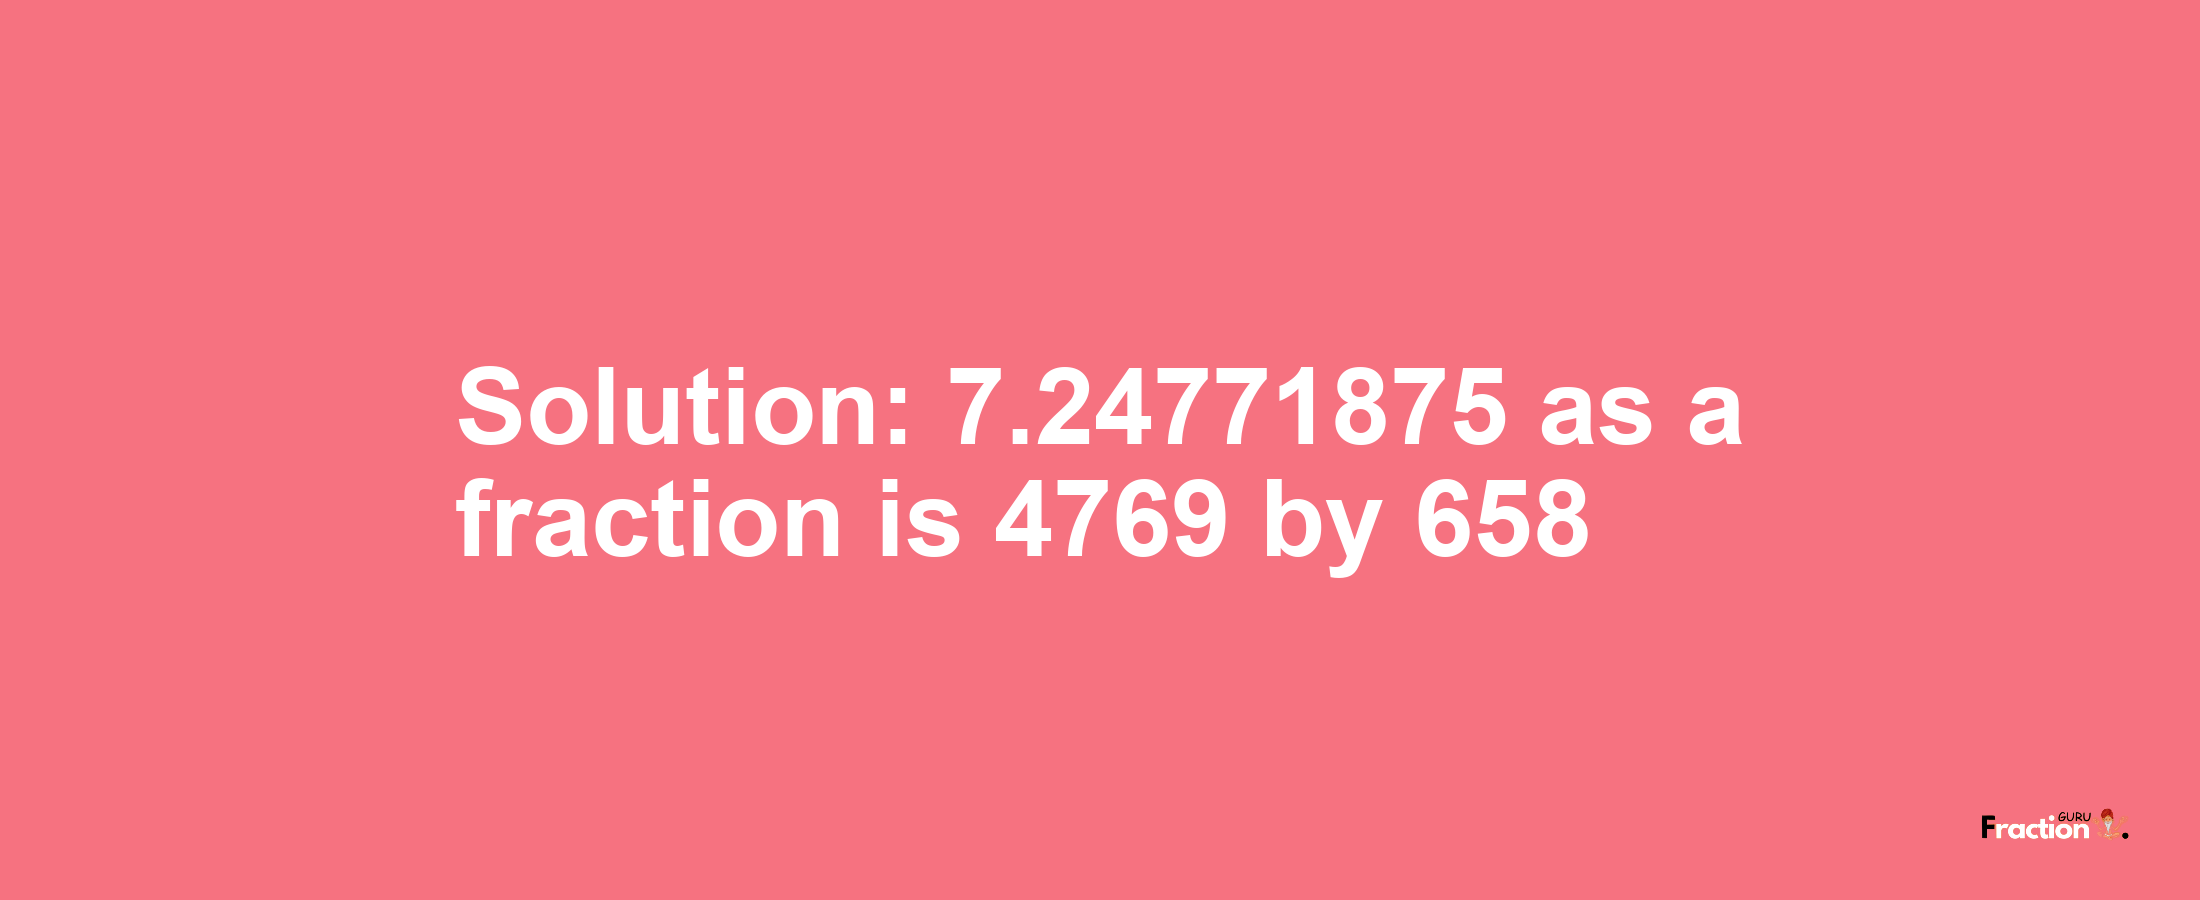 Solution:7.24771875 as a fraction is 4769/658